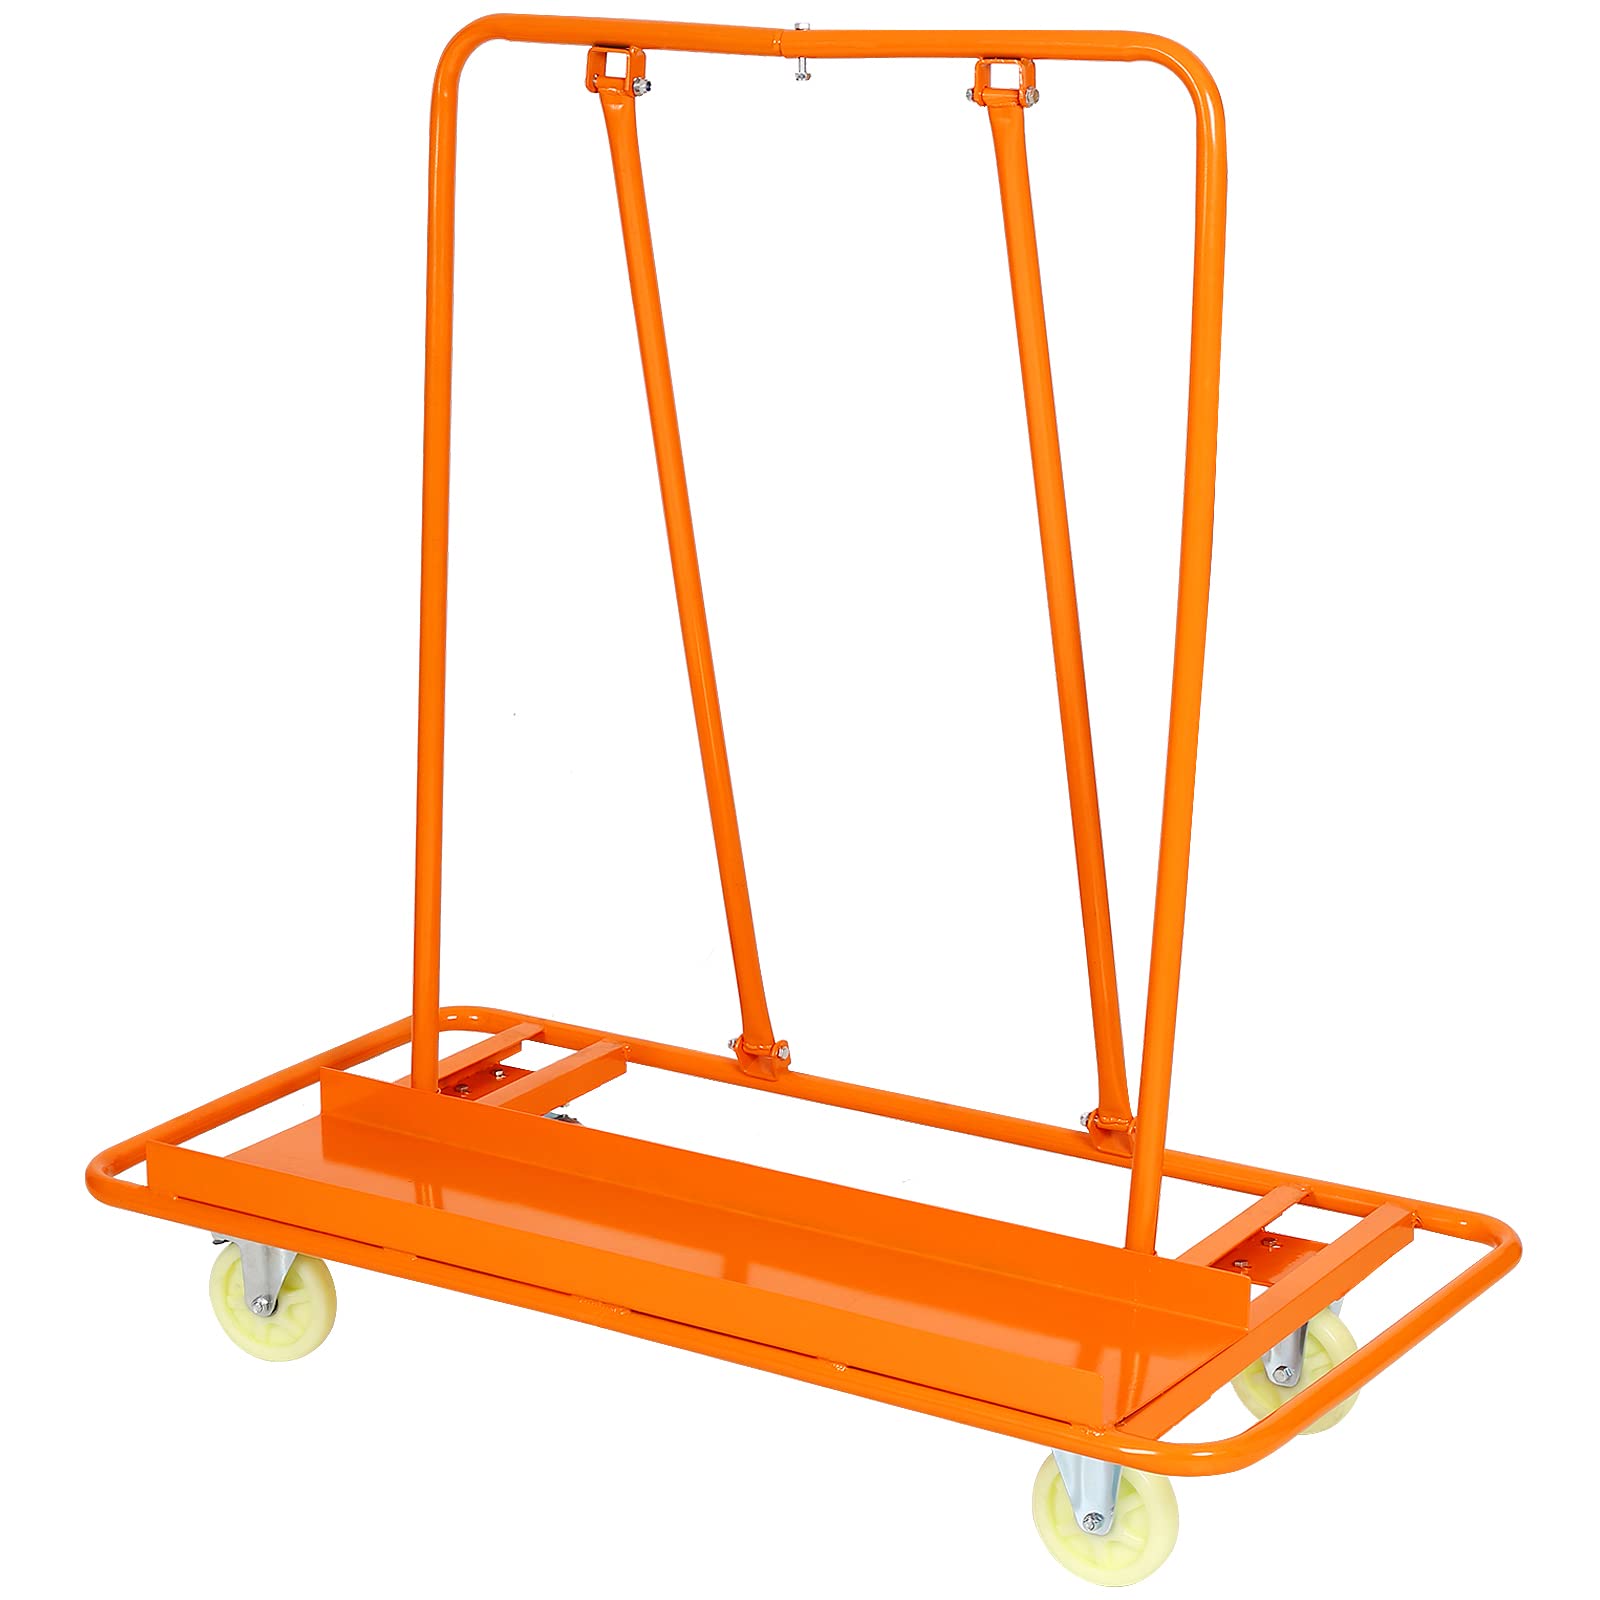 Veemuaro Heavy Duty Drywall Sheet Cart, Panel Dolly Cart 1600LBS Load Capacity with Four 5" Wheels, Service Cart for Garage, Home, Warehouse (Orange)